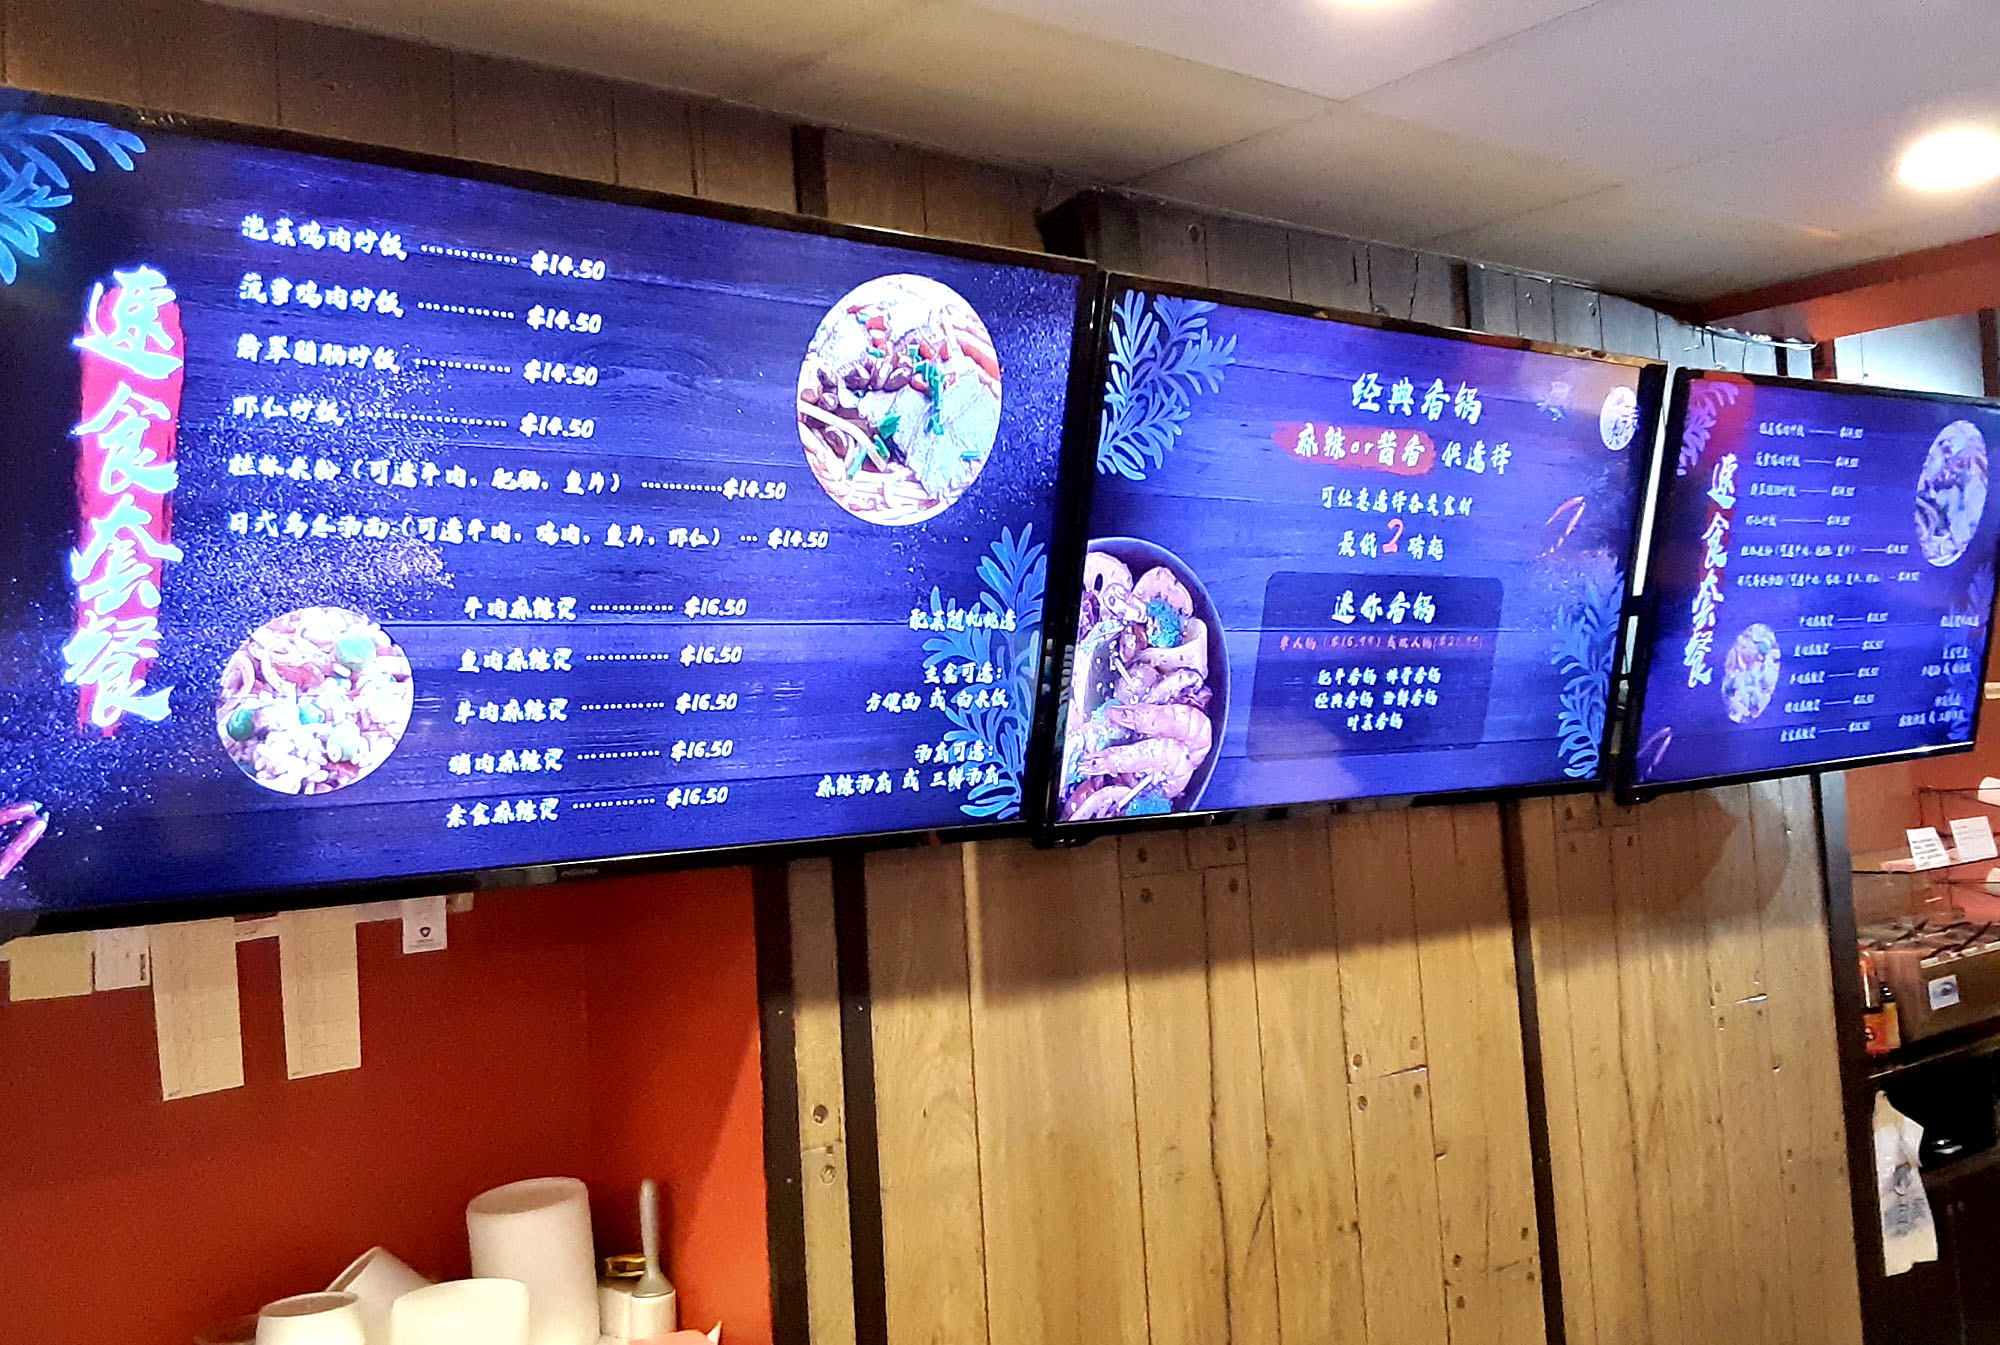 A menu of the ramen options for non-English speakers. Photo by Paul Young.